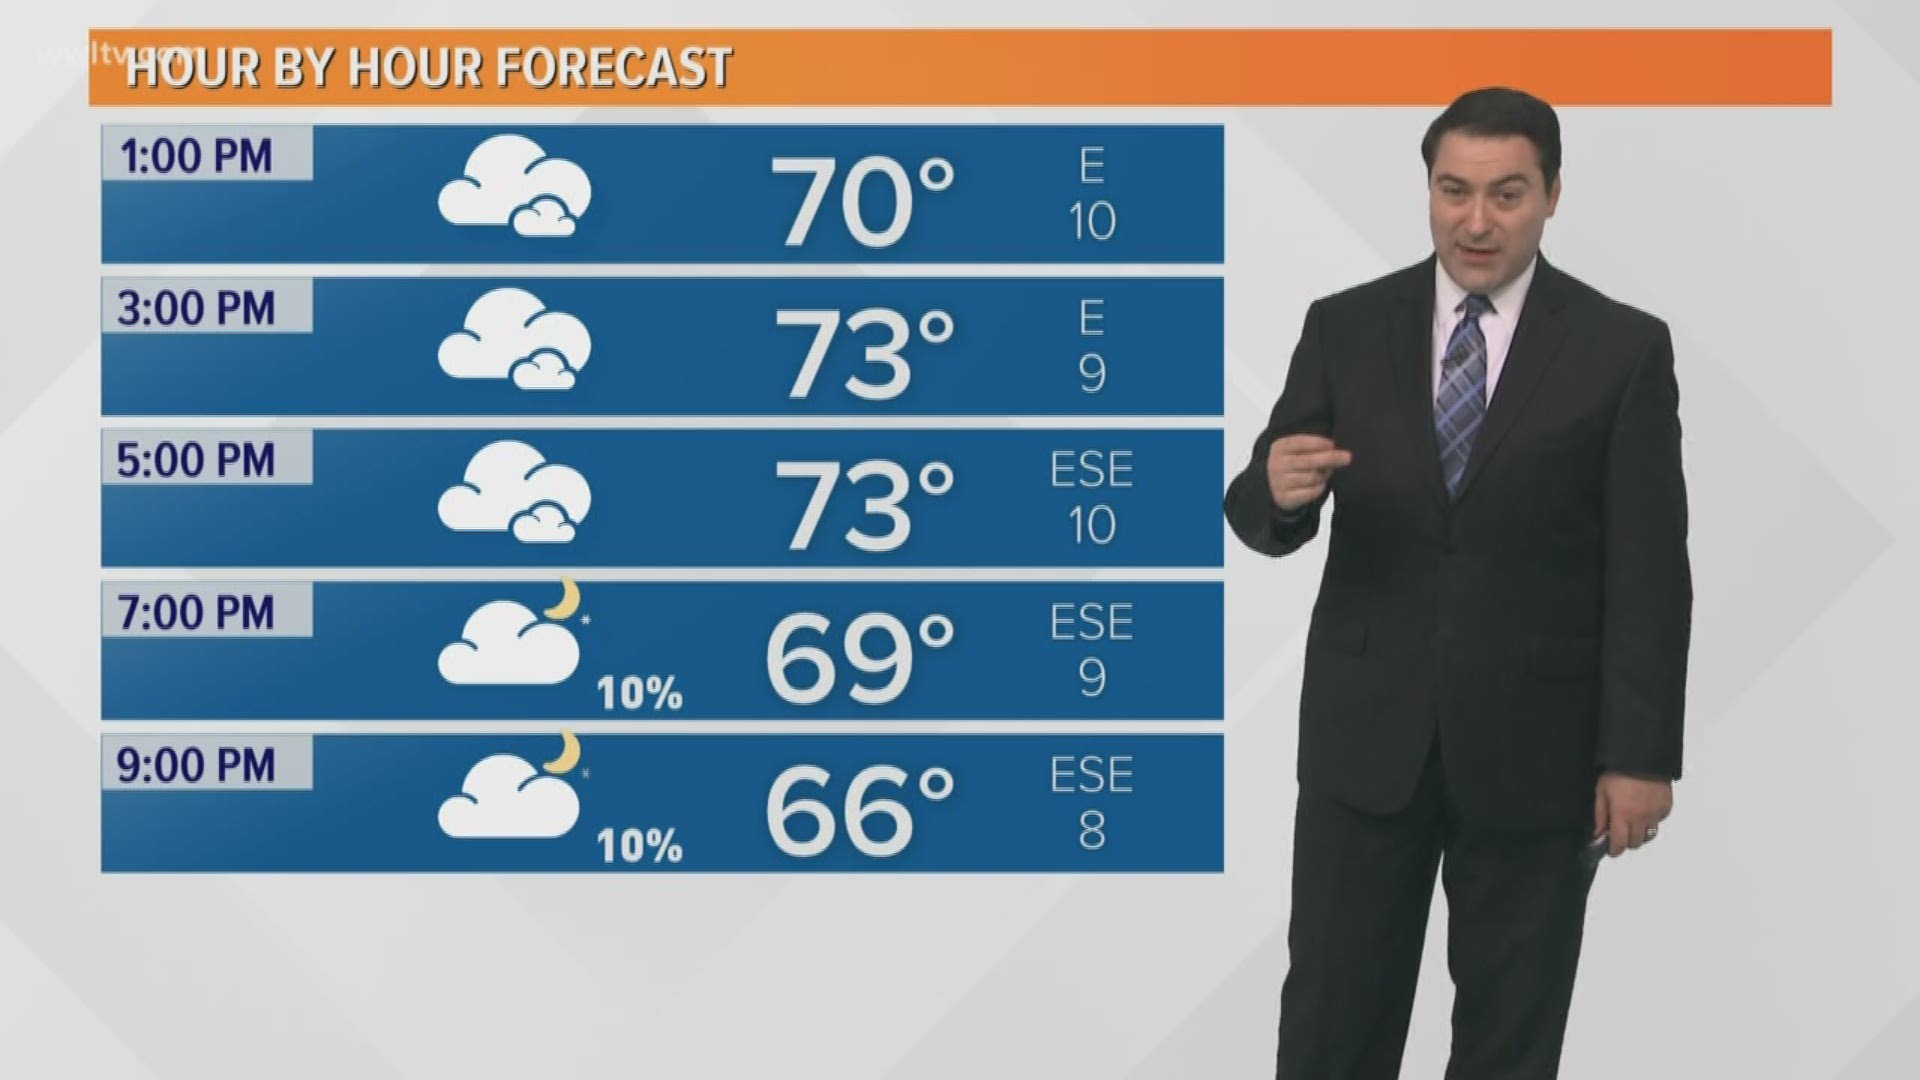 Meteorologist Dave Nussbaum says we will be mild today, but near record highs are expected on Wednesday. Then it will turn much cooler this weekend.